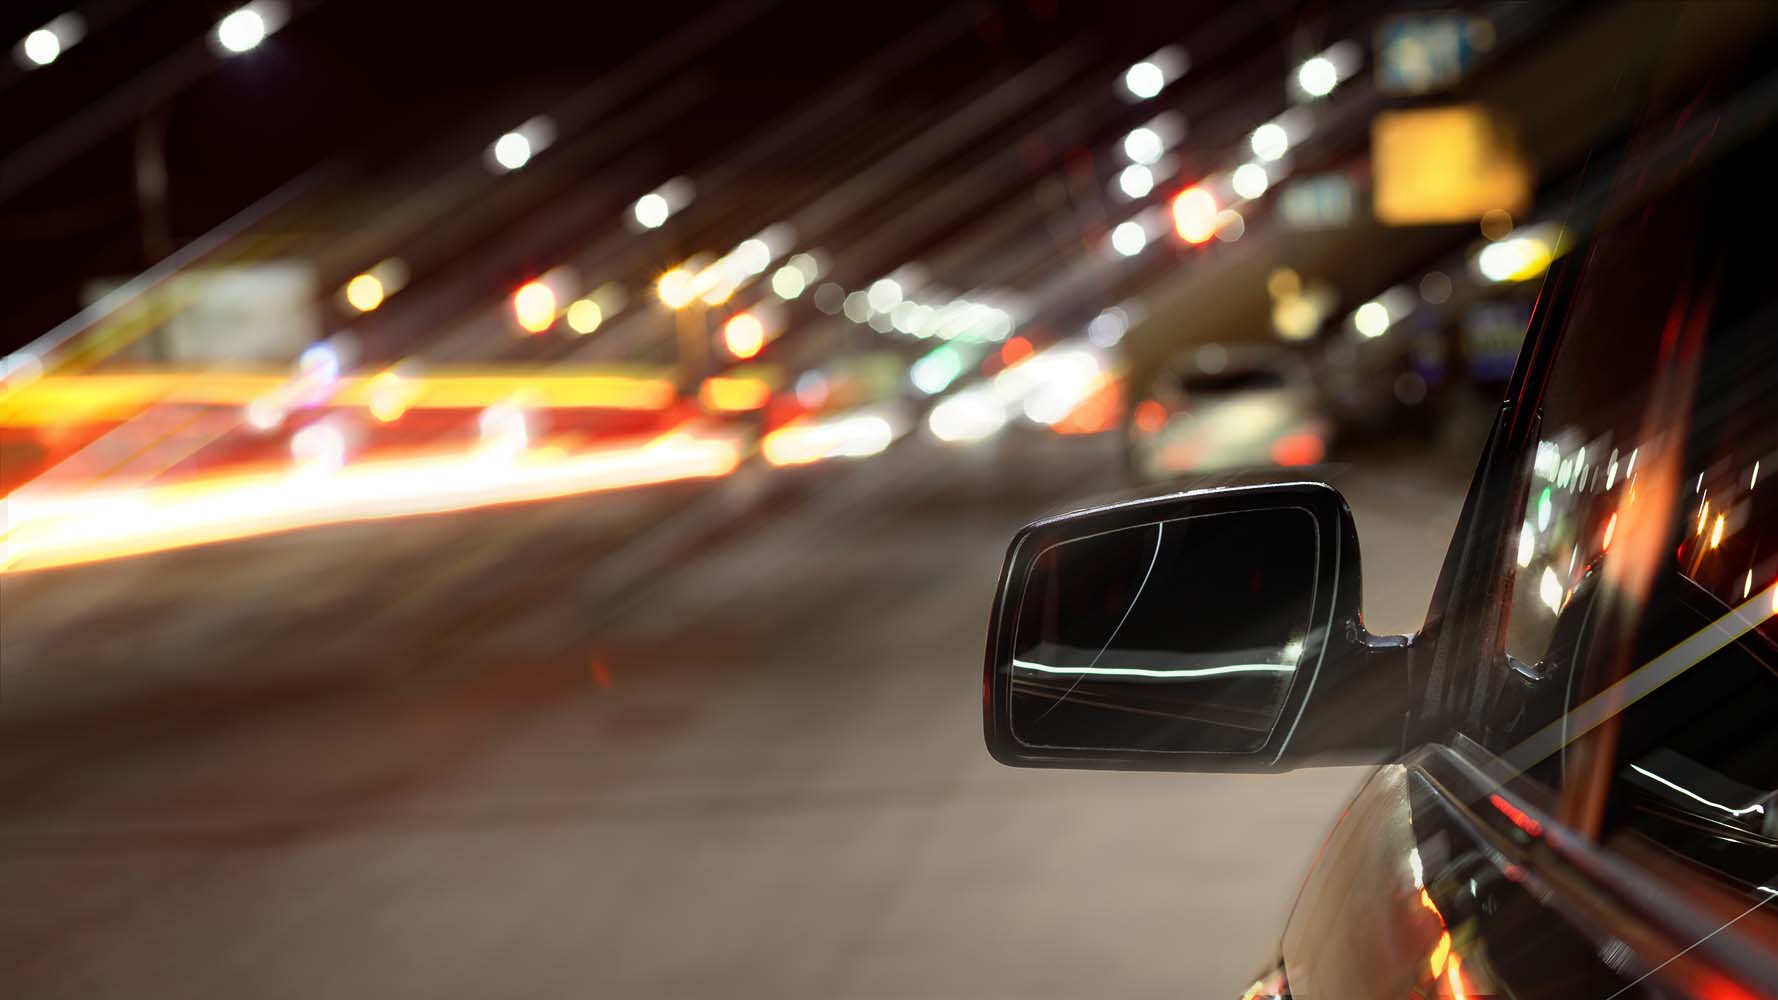 Image of a busy road at night, the lights are blurred and glare. This represents how a person with keratoconus might view the scene.